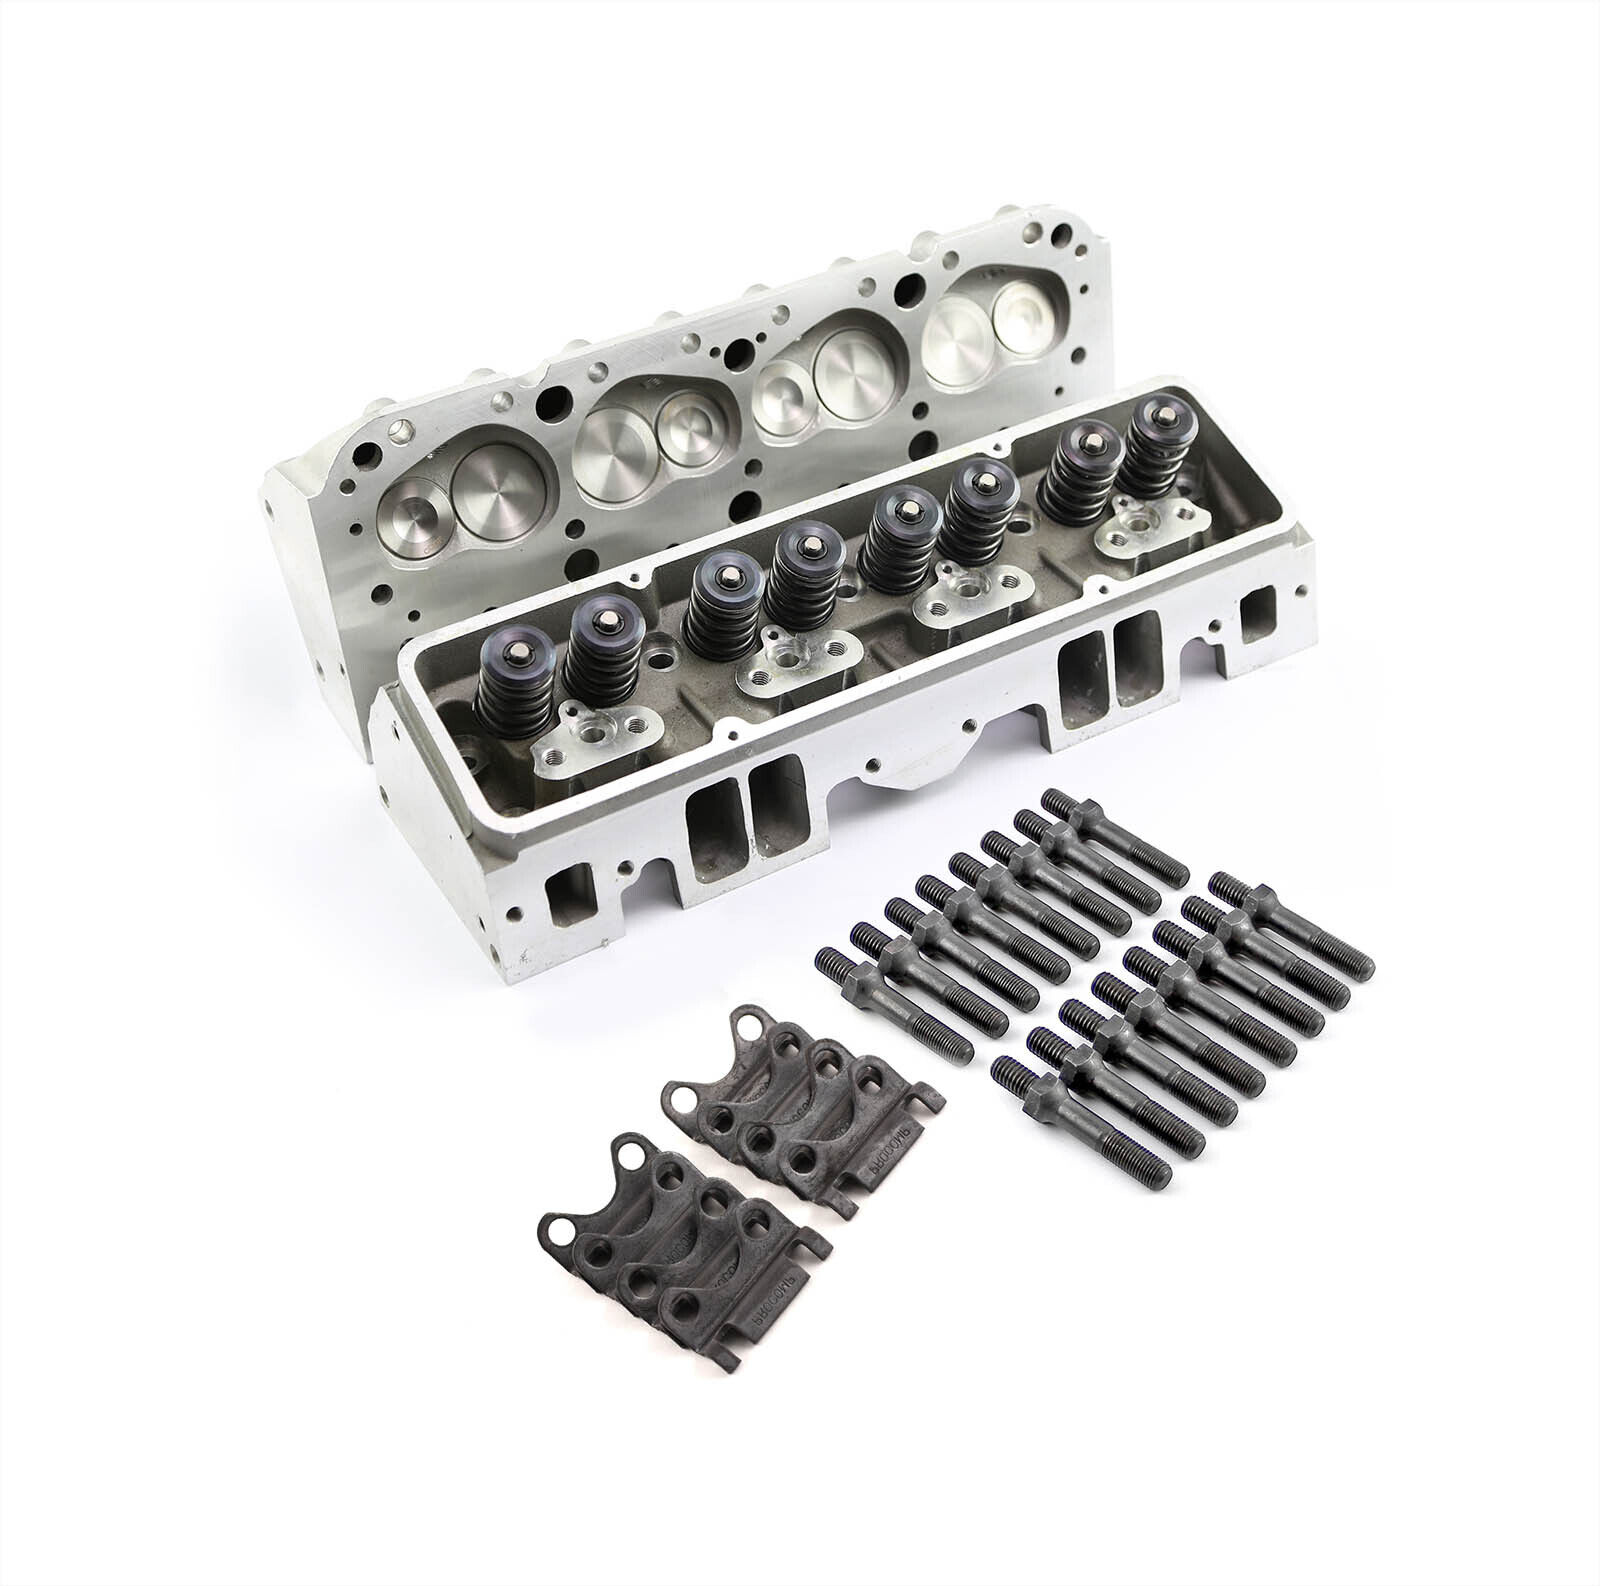 SBC Chevy 350 Complete Angle Aluminum Cylinder Heads 190cc 64 Studs Guide Plates